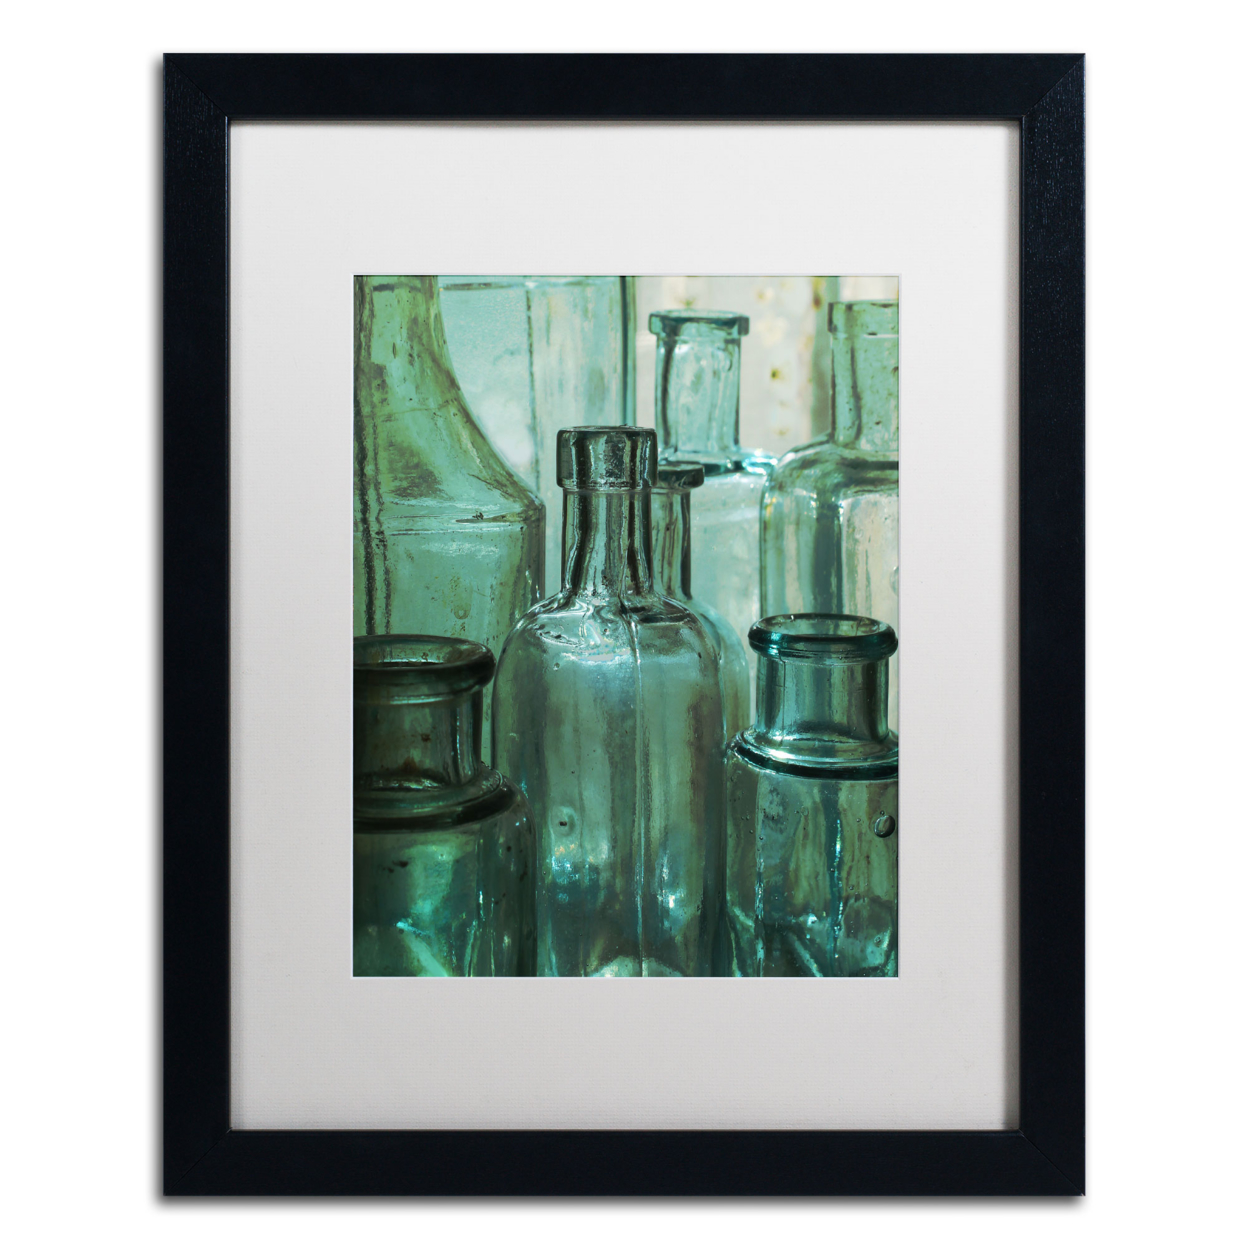 Patty Tuggle 'Antique Bottles' Black Wooden Framed Art 18 X 22 Inches